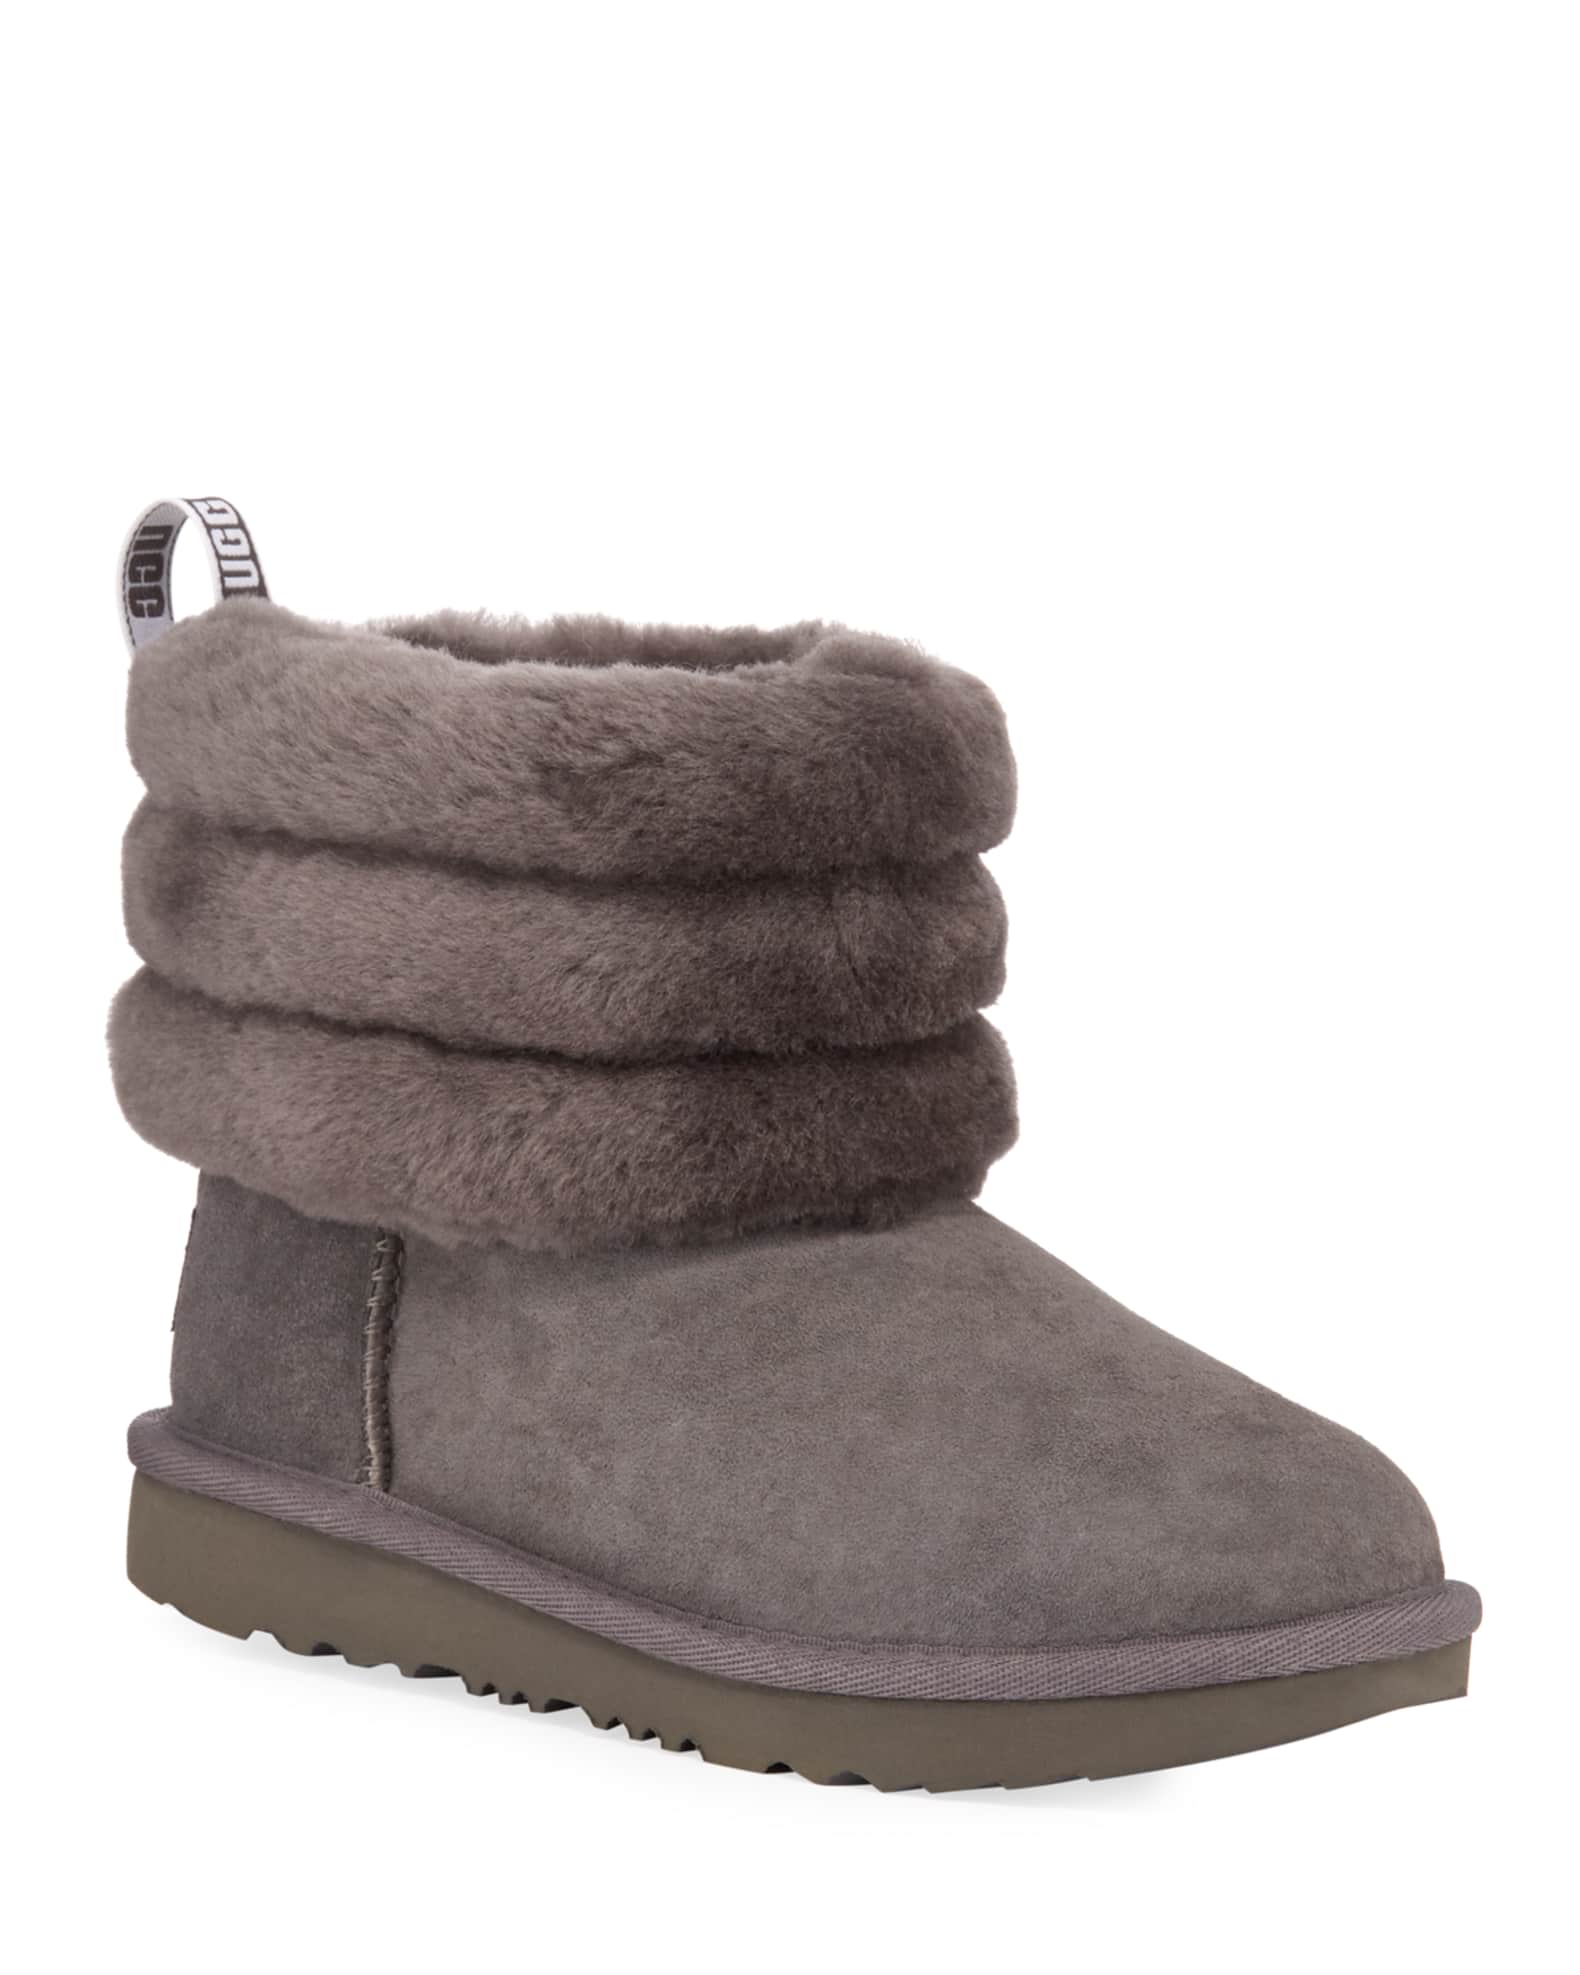 Fluff Mini Quilted Boots, Kids | Neiman Marcus